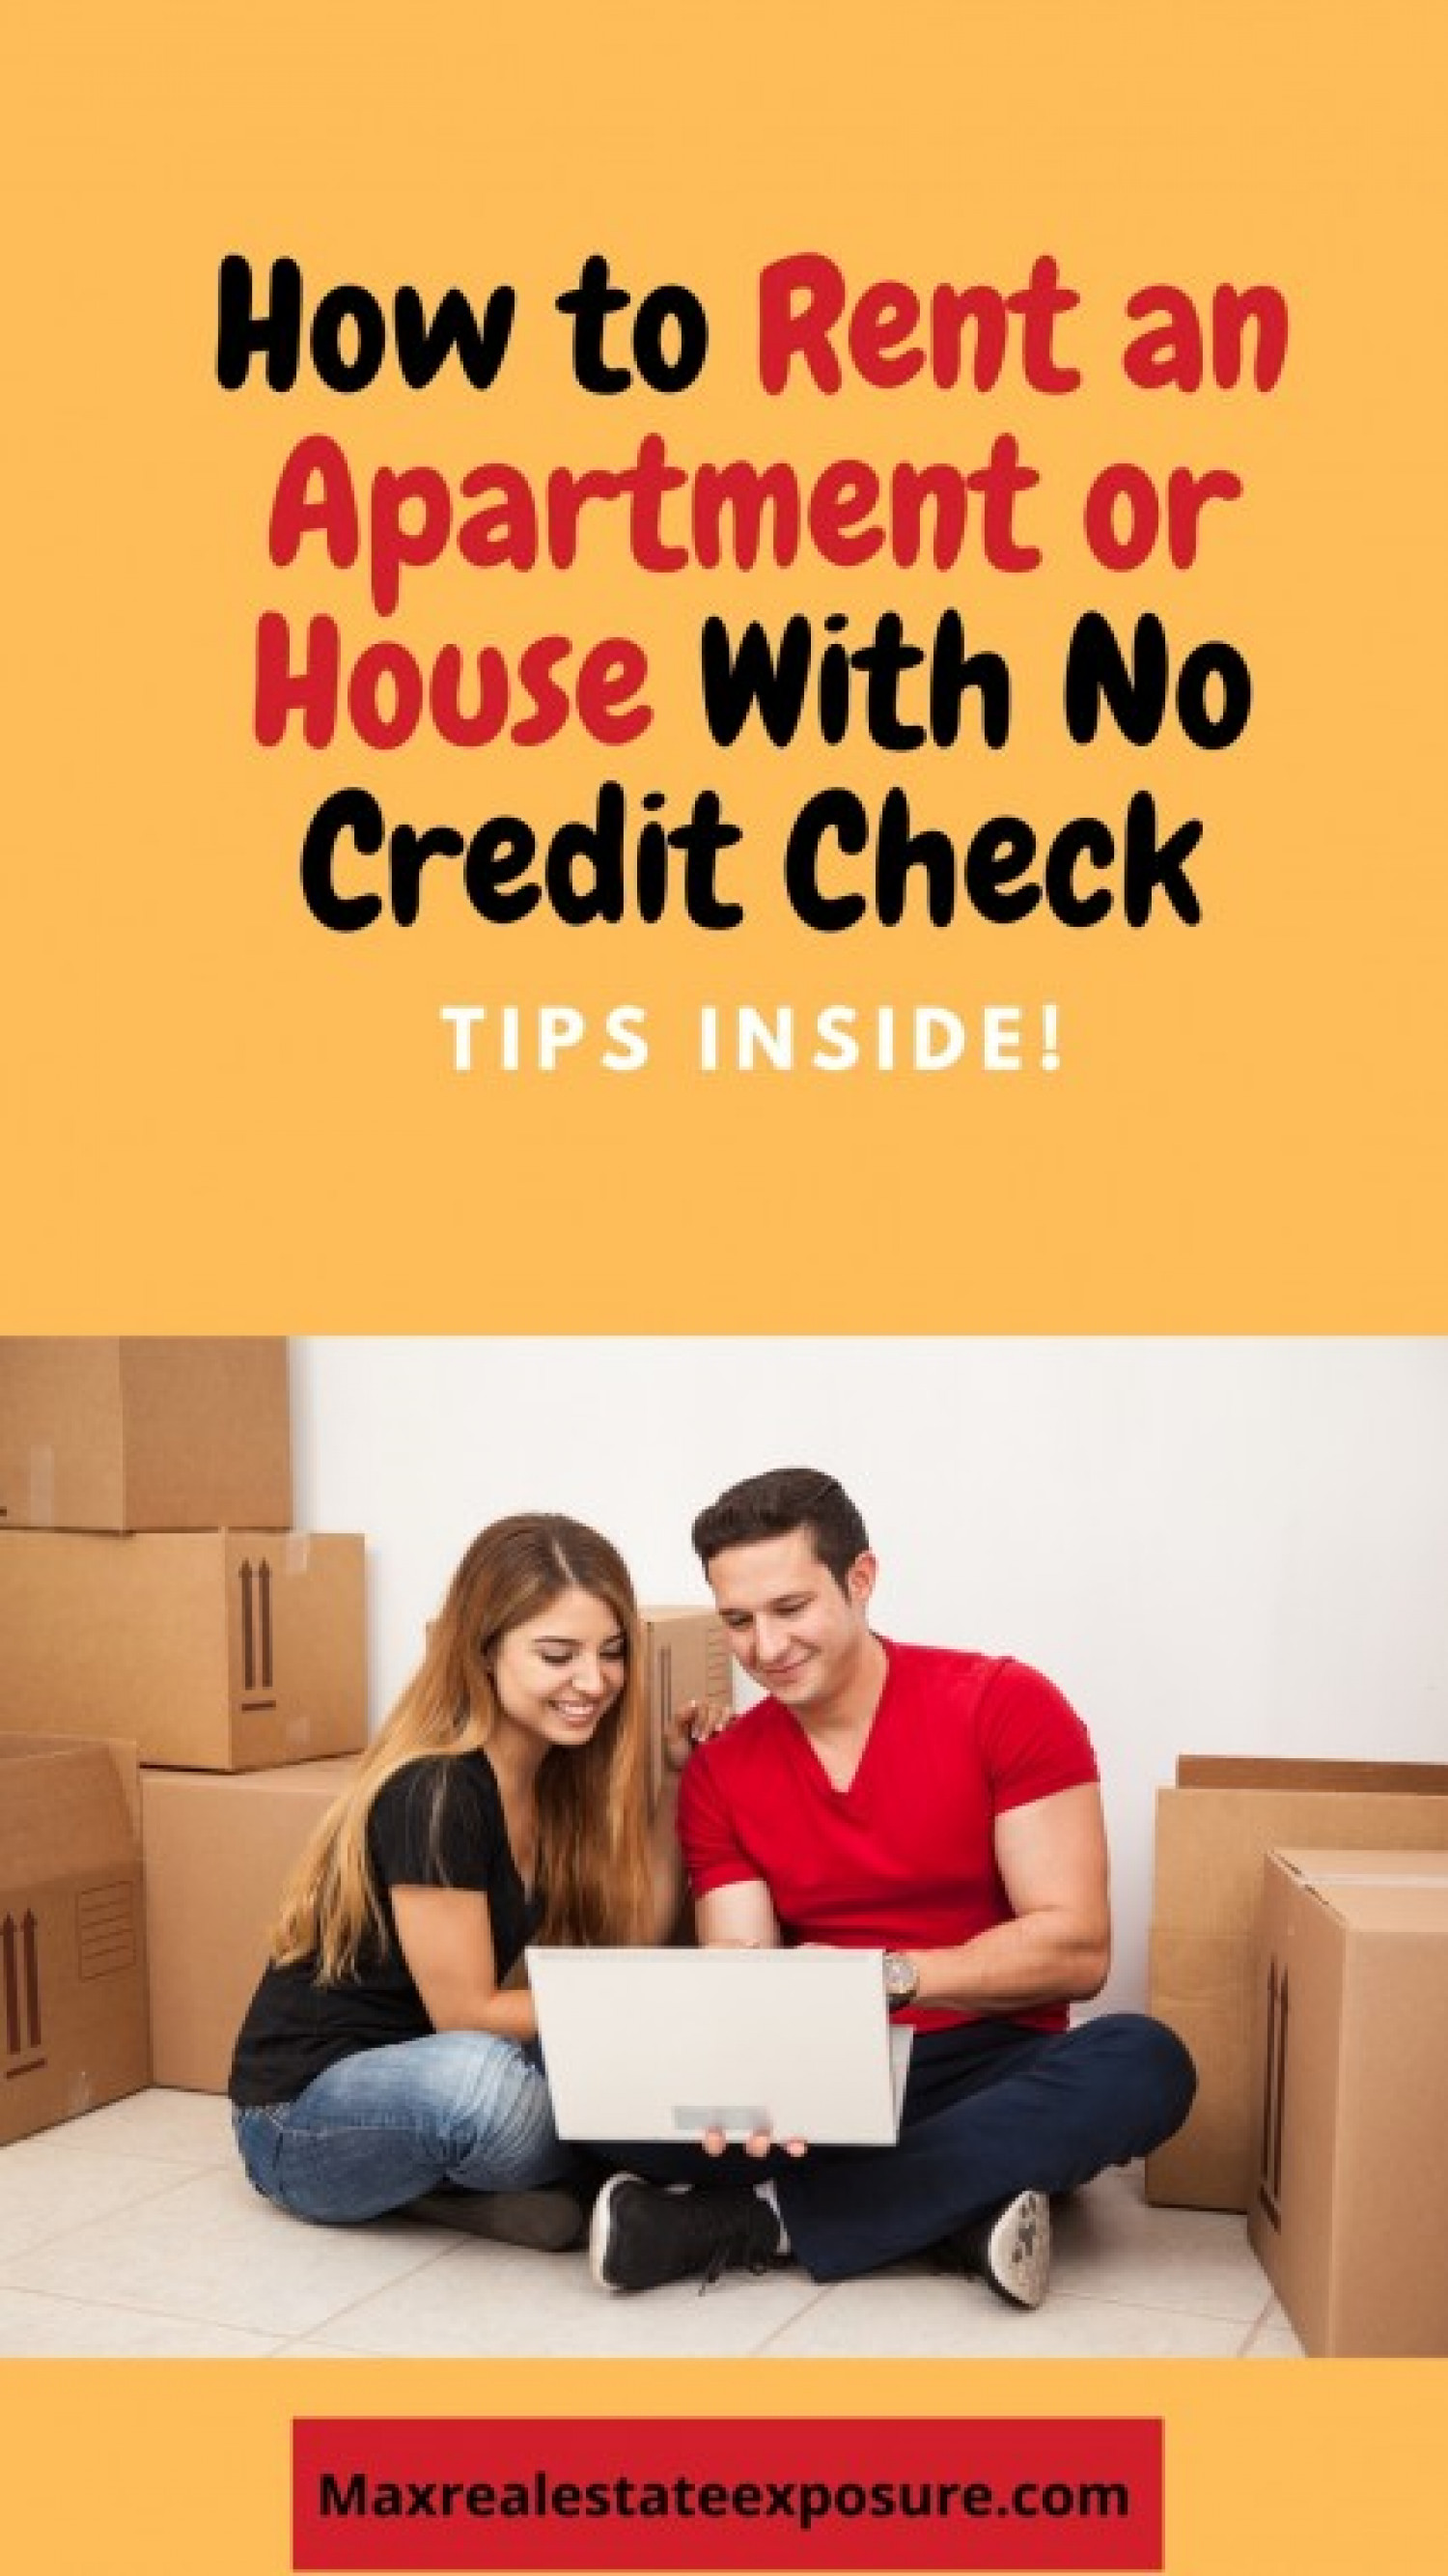 Tips For Renting an Apartment or House With No Credit Check Infographic